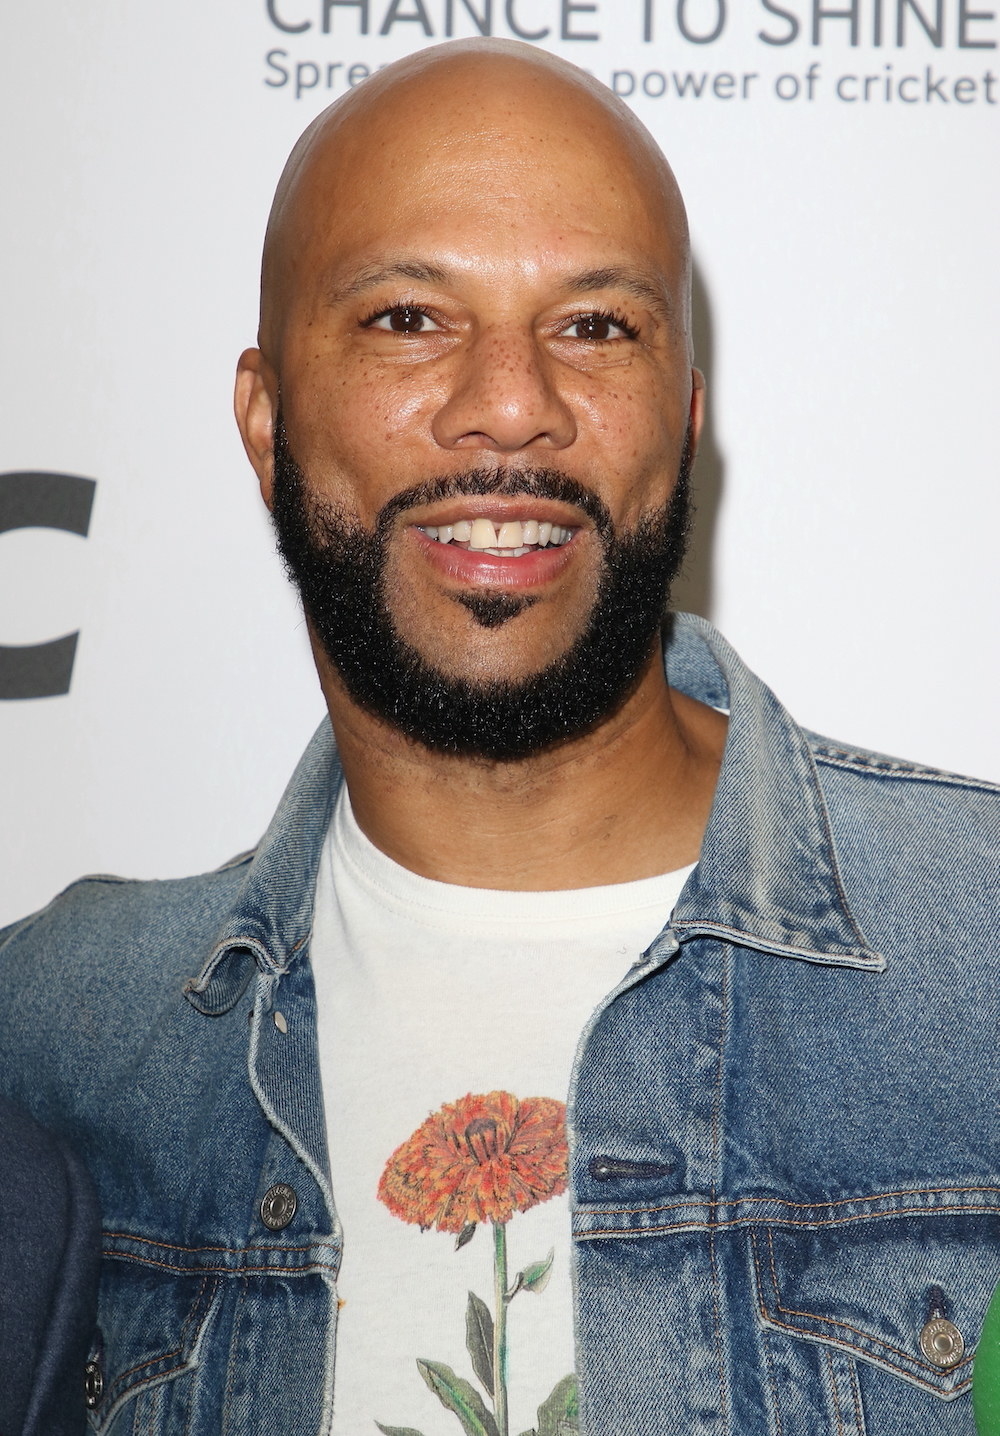 Smiling Common in a beard and mustache and wearing a denim jacket